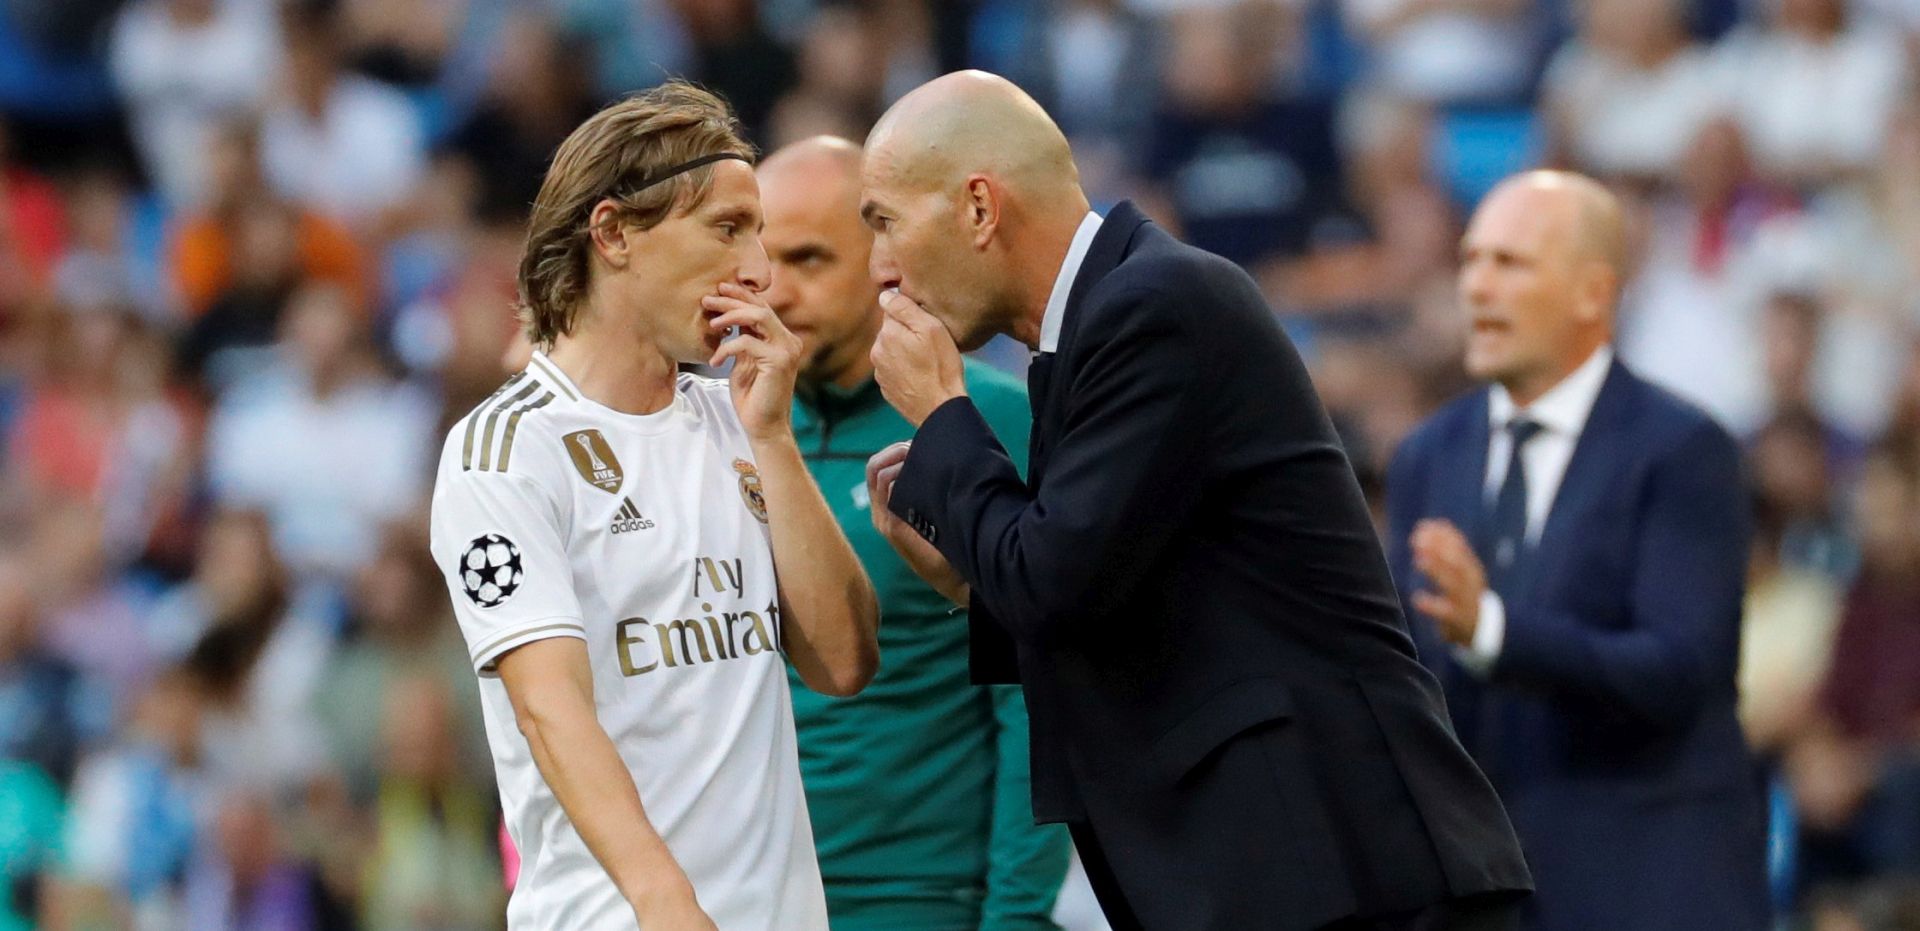 epa07886615 Real Madrid's head coach Zinedine Zidane (R) talks with Luka Modric (L) during the UEFA Champions League group A match between Real Madrid and Club Brugge at Santiago Bernabeu in Madrid, Spain, 01 October 2019.  EPA/JuanJo Martin